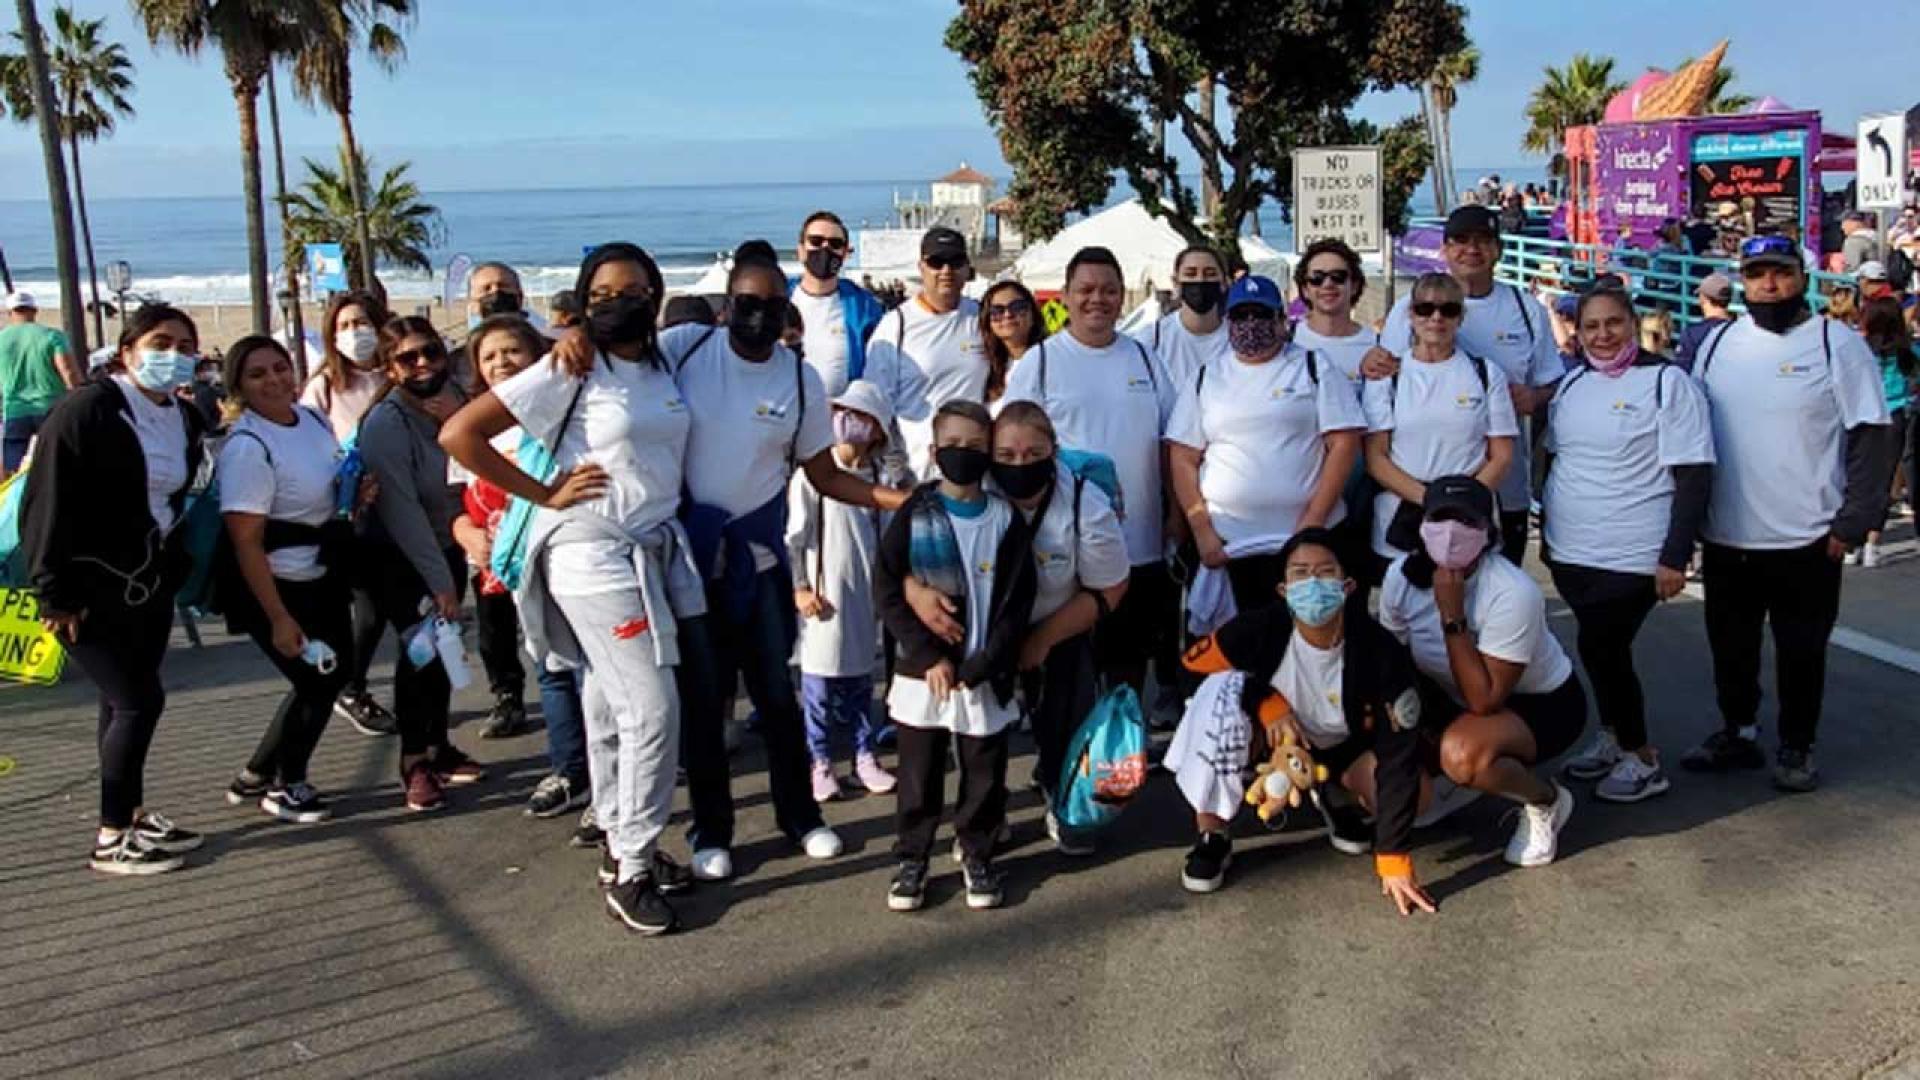 WPCCU staff supported the SKECHERS 13th Annual Pier to Pier Friendship Walk.